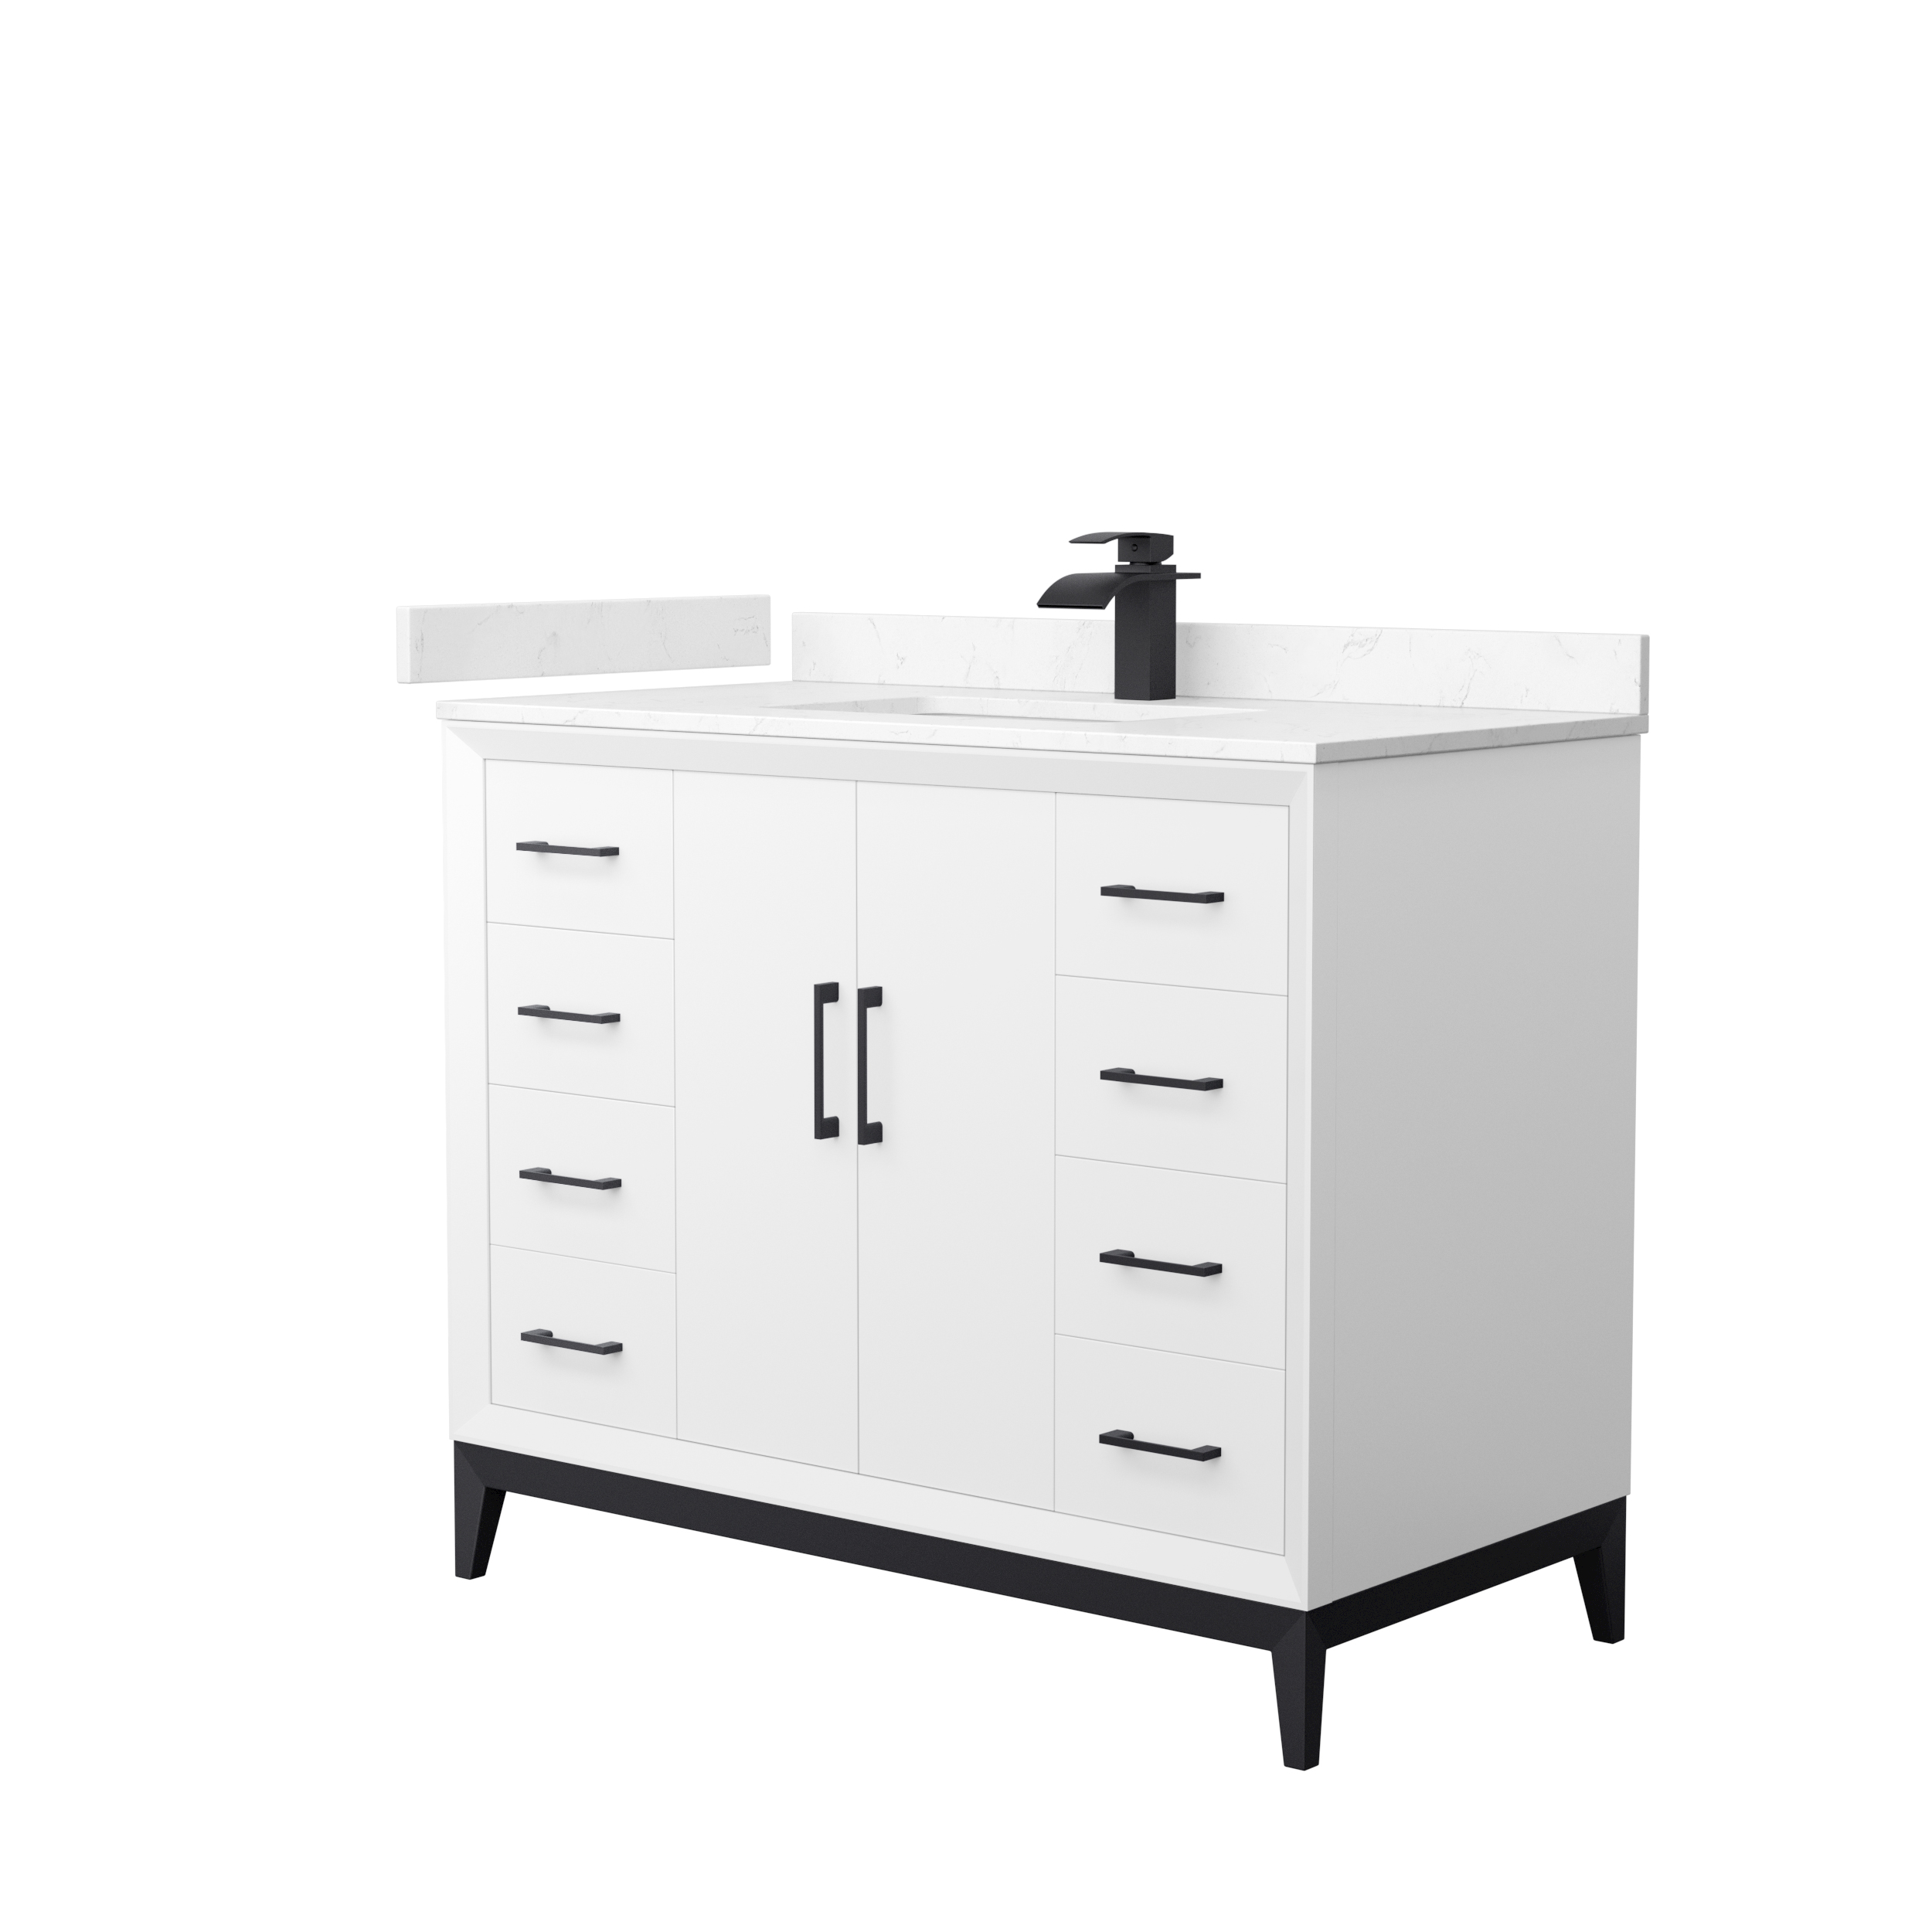 Amici 42" Single Vanity with optional Cultured Marble Counter - White WC-8181-42-SGL-VAN-WHT-